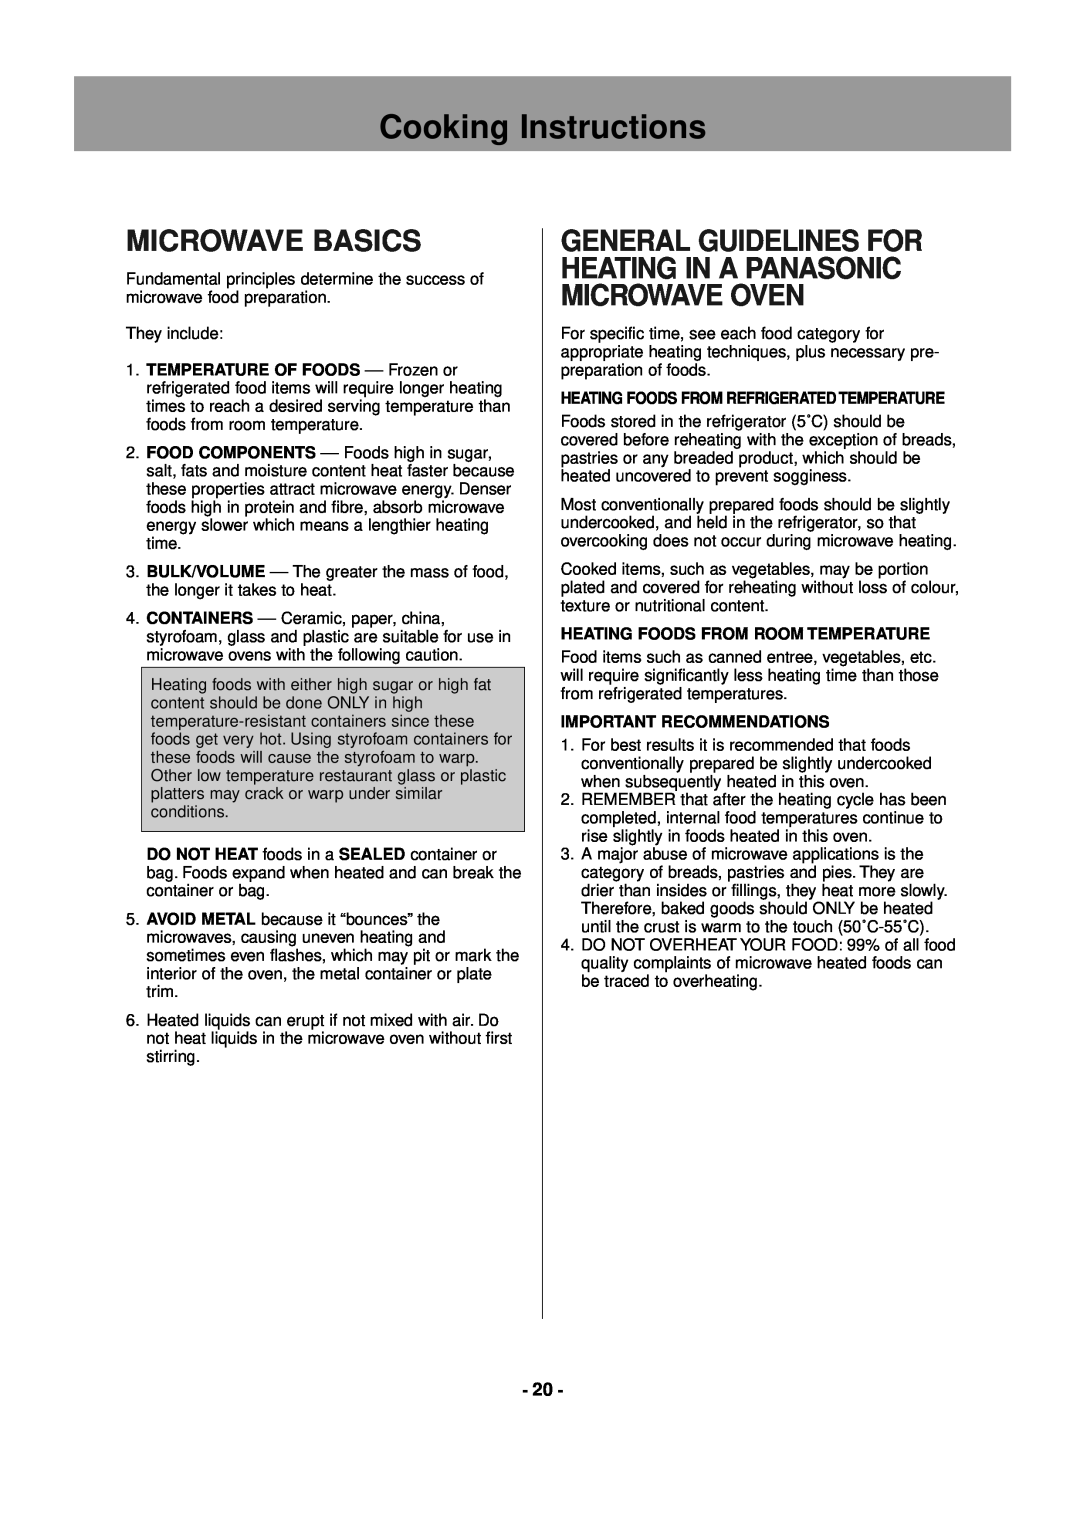 Panasonic NE-1846 Microwave Basics, Cooking Instructions, General Guidelines For Heating In A Panasonic Microwave Oven 